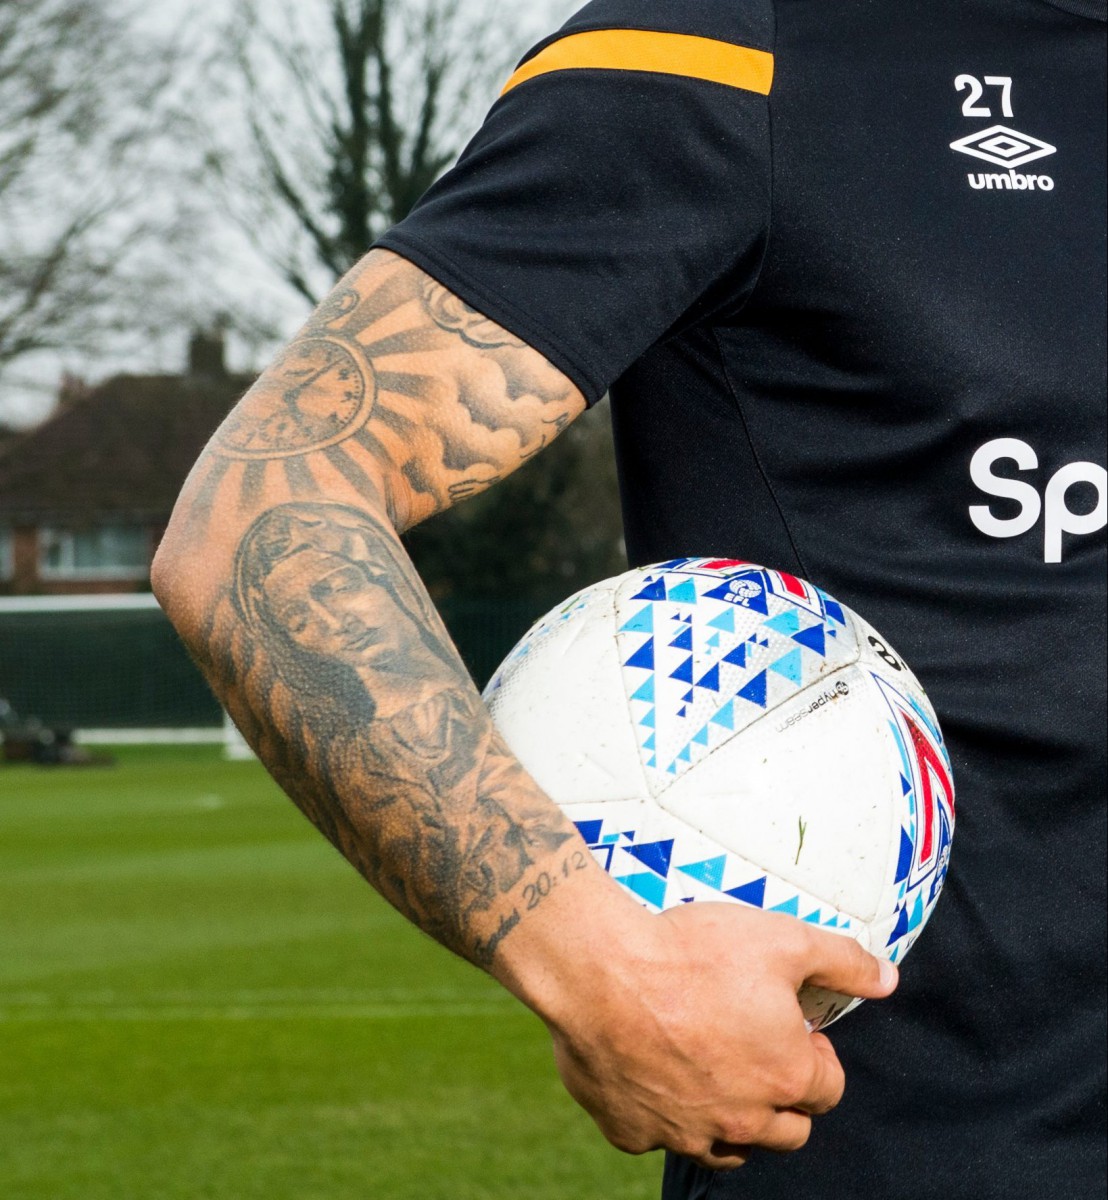 Magennis has tattoos dedicated to his sons and his belief in Jesus on his arms as a permanent reminder